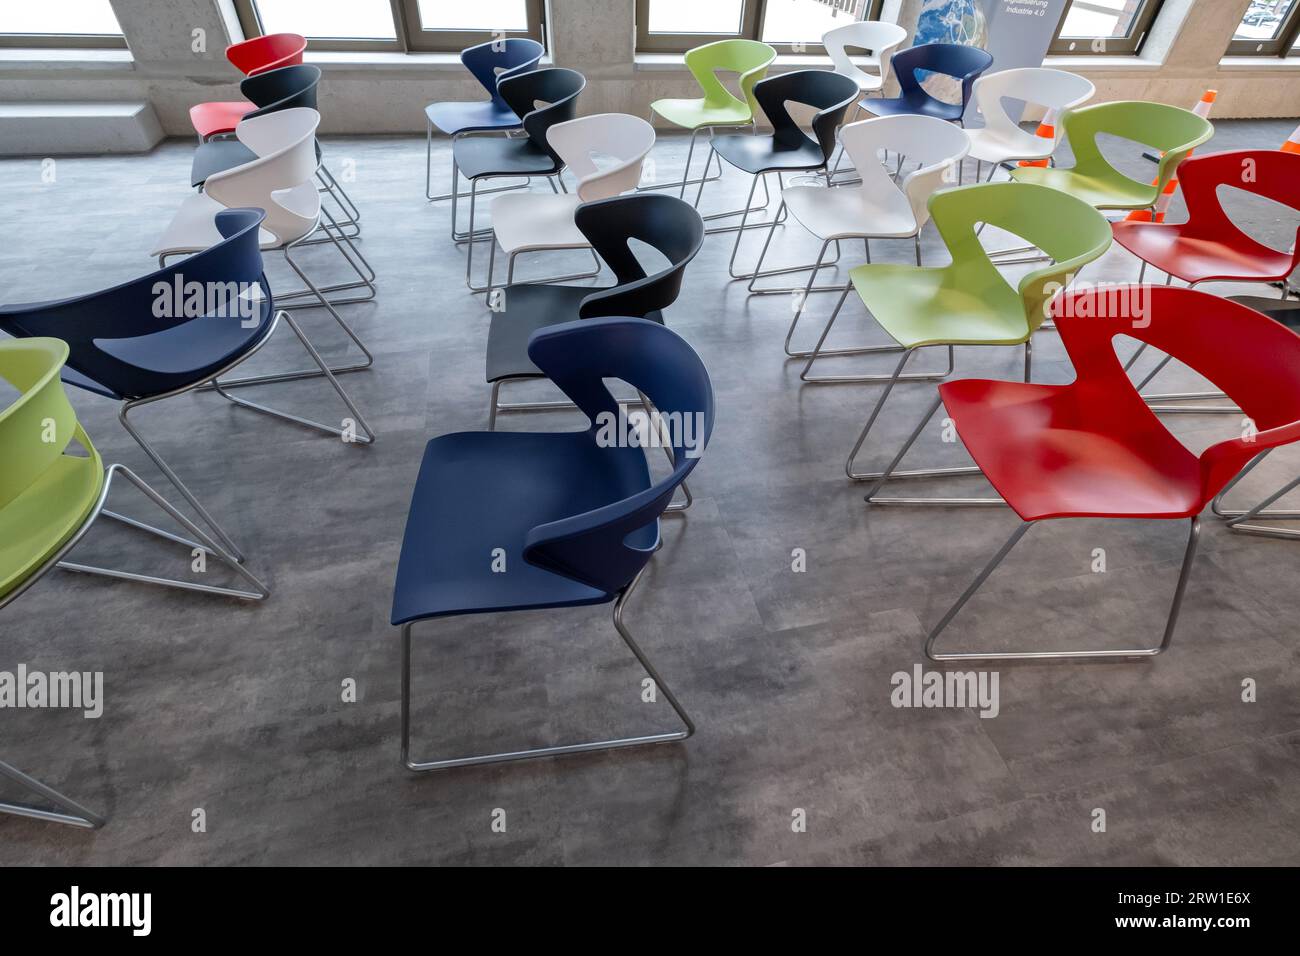 07.07.2022, Germany, Bremen, Bremen - Plastic chairs in the room of a research institute. 00A220707D079CAROEX.JPG [MODEL RELEASE: NOT APPLICABLE, PROP Stock Photo